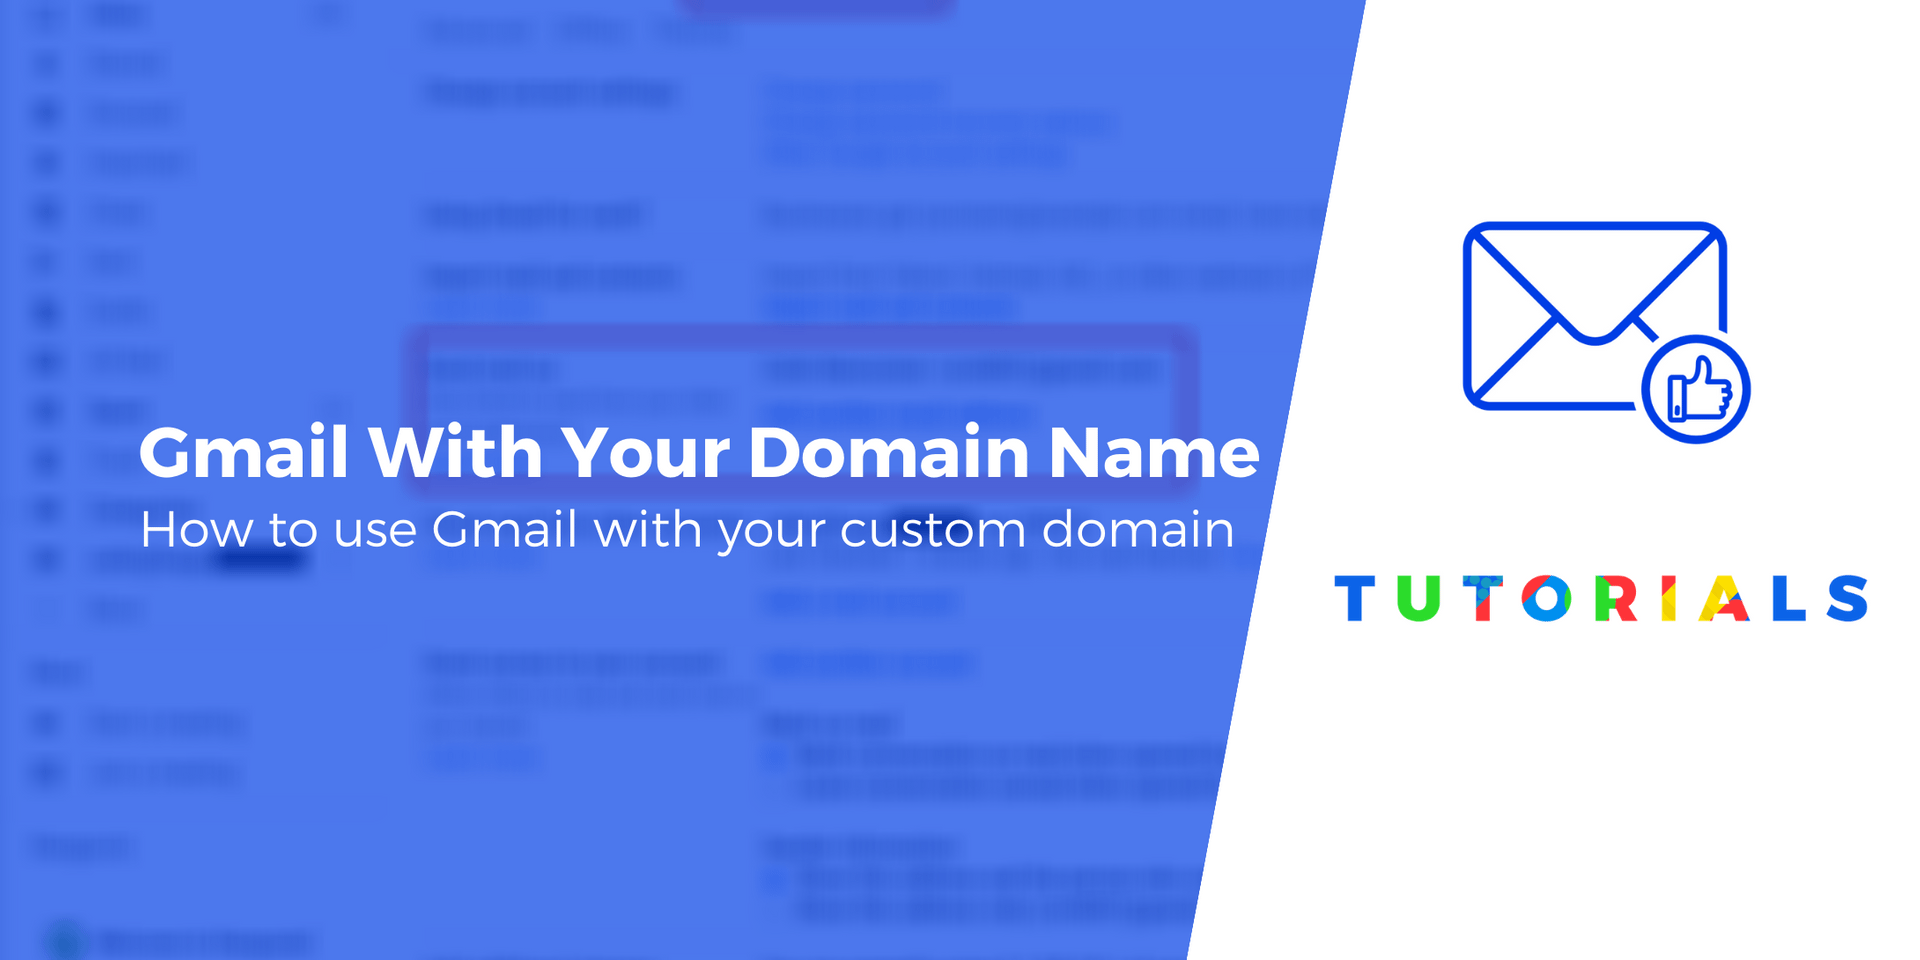 How to set up Gmail to send and receive emails using your domain name, Gmail with a custom domain